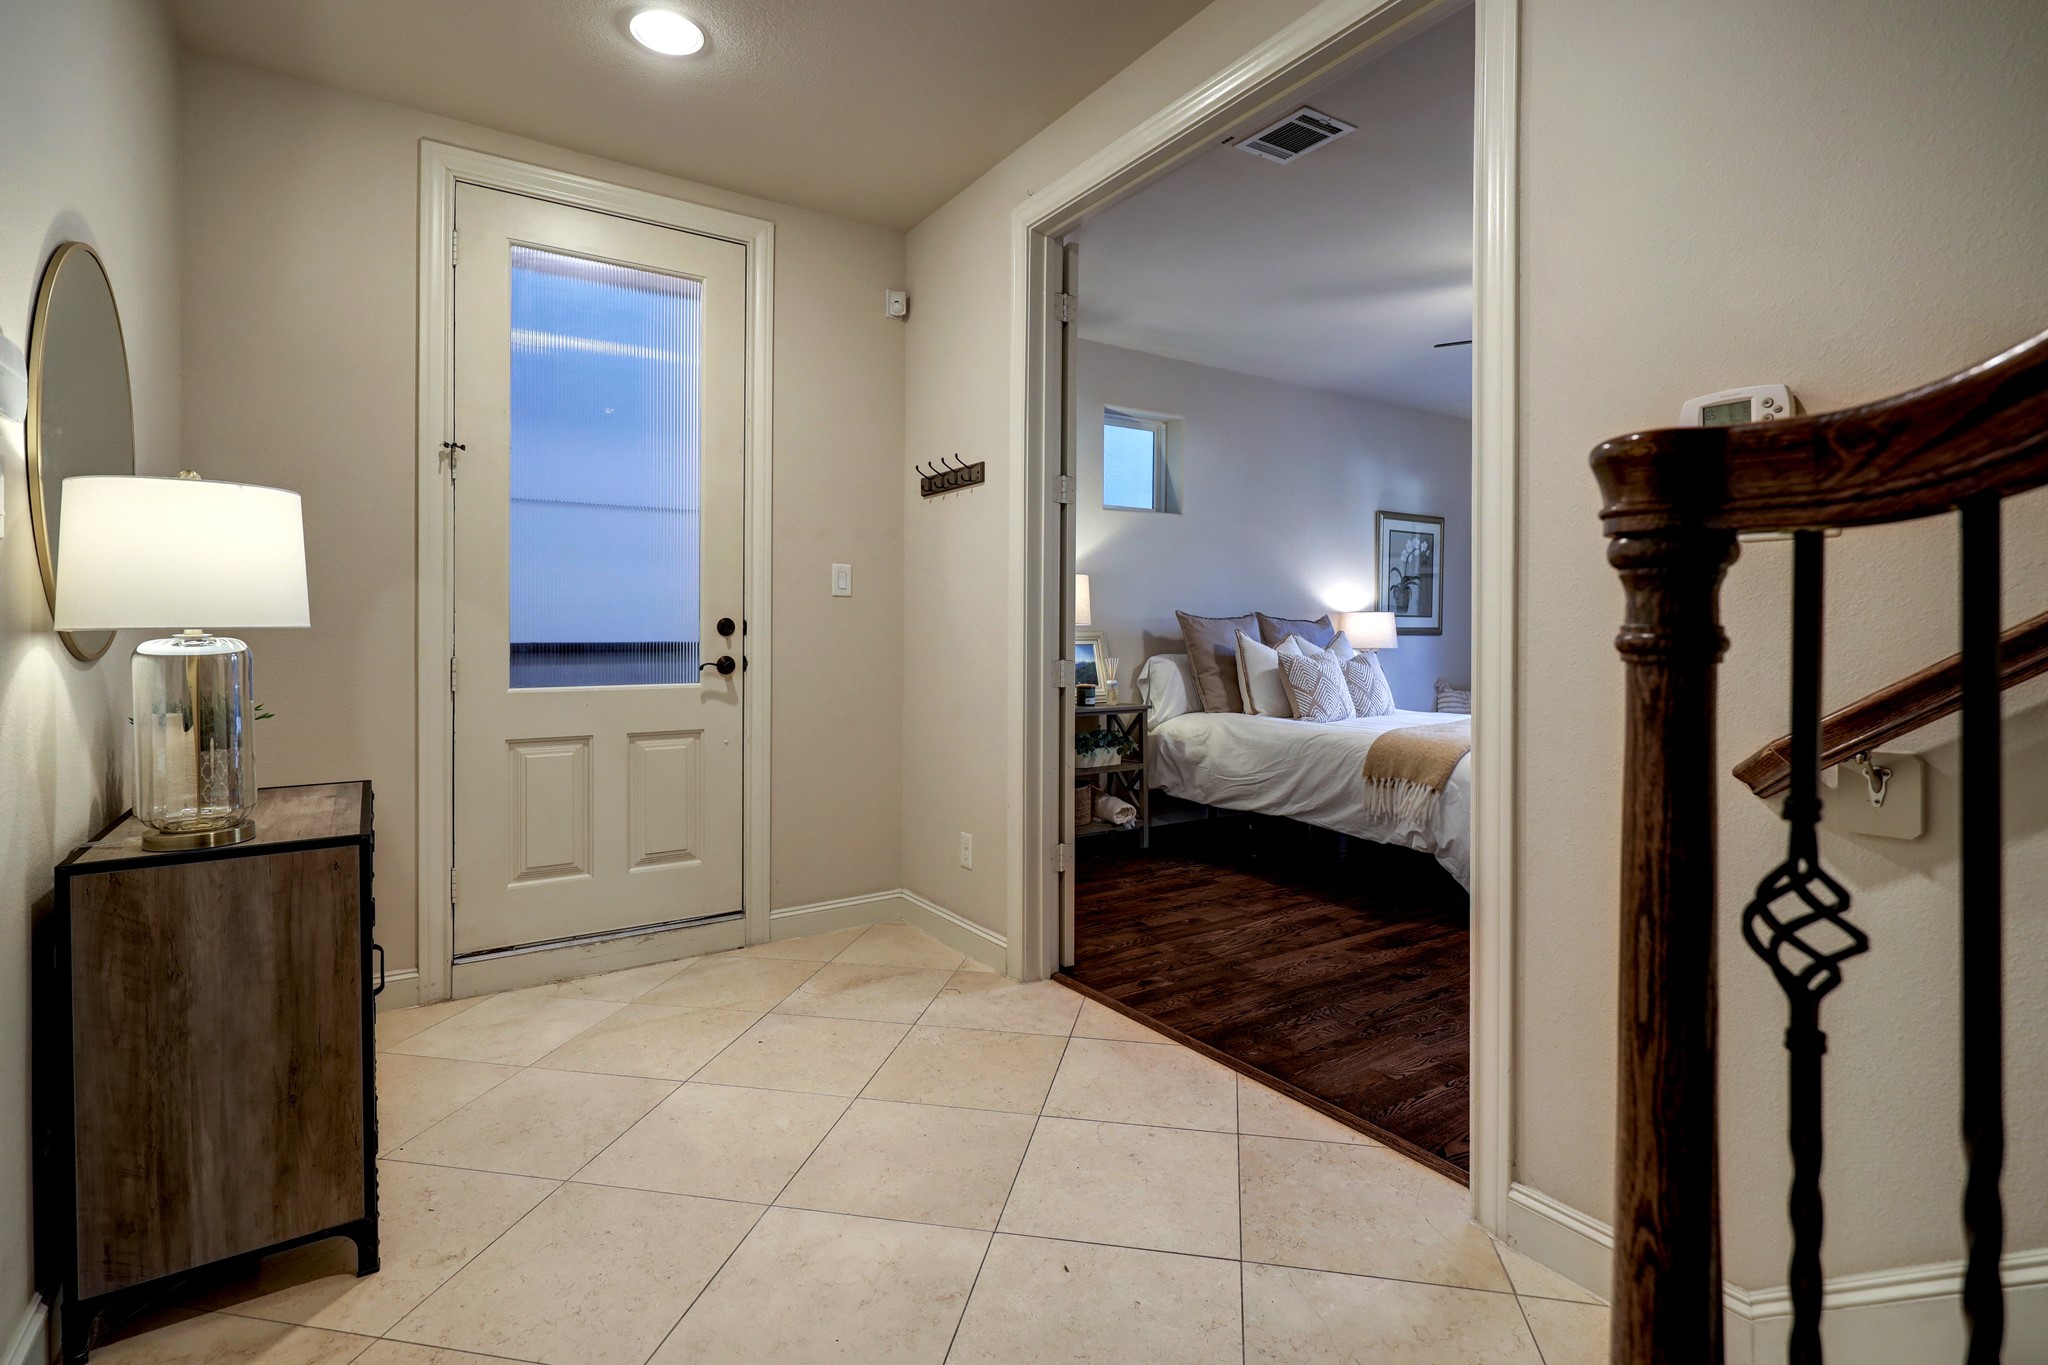 The front door opens to a formal entryway with double-doors.